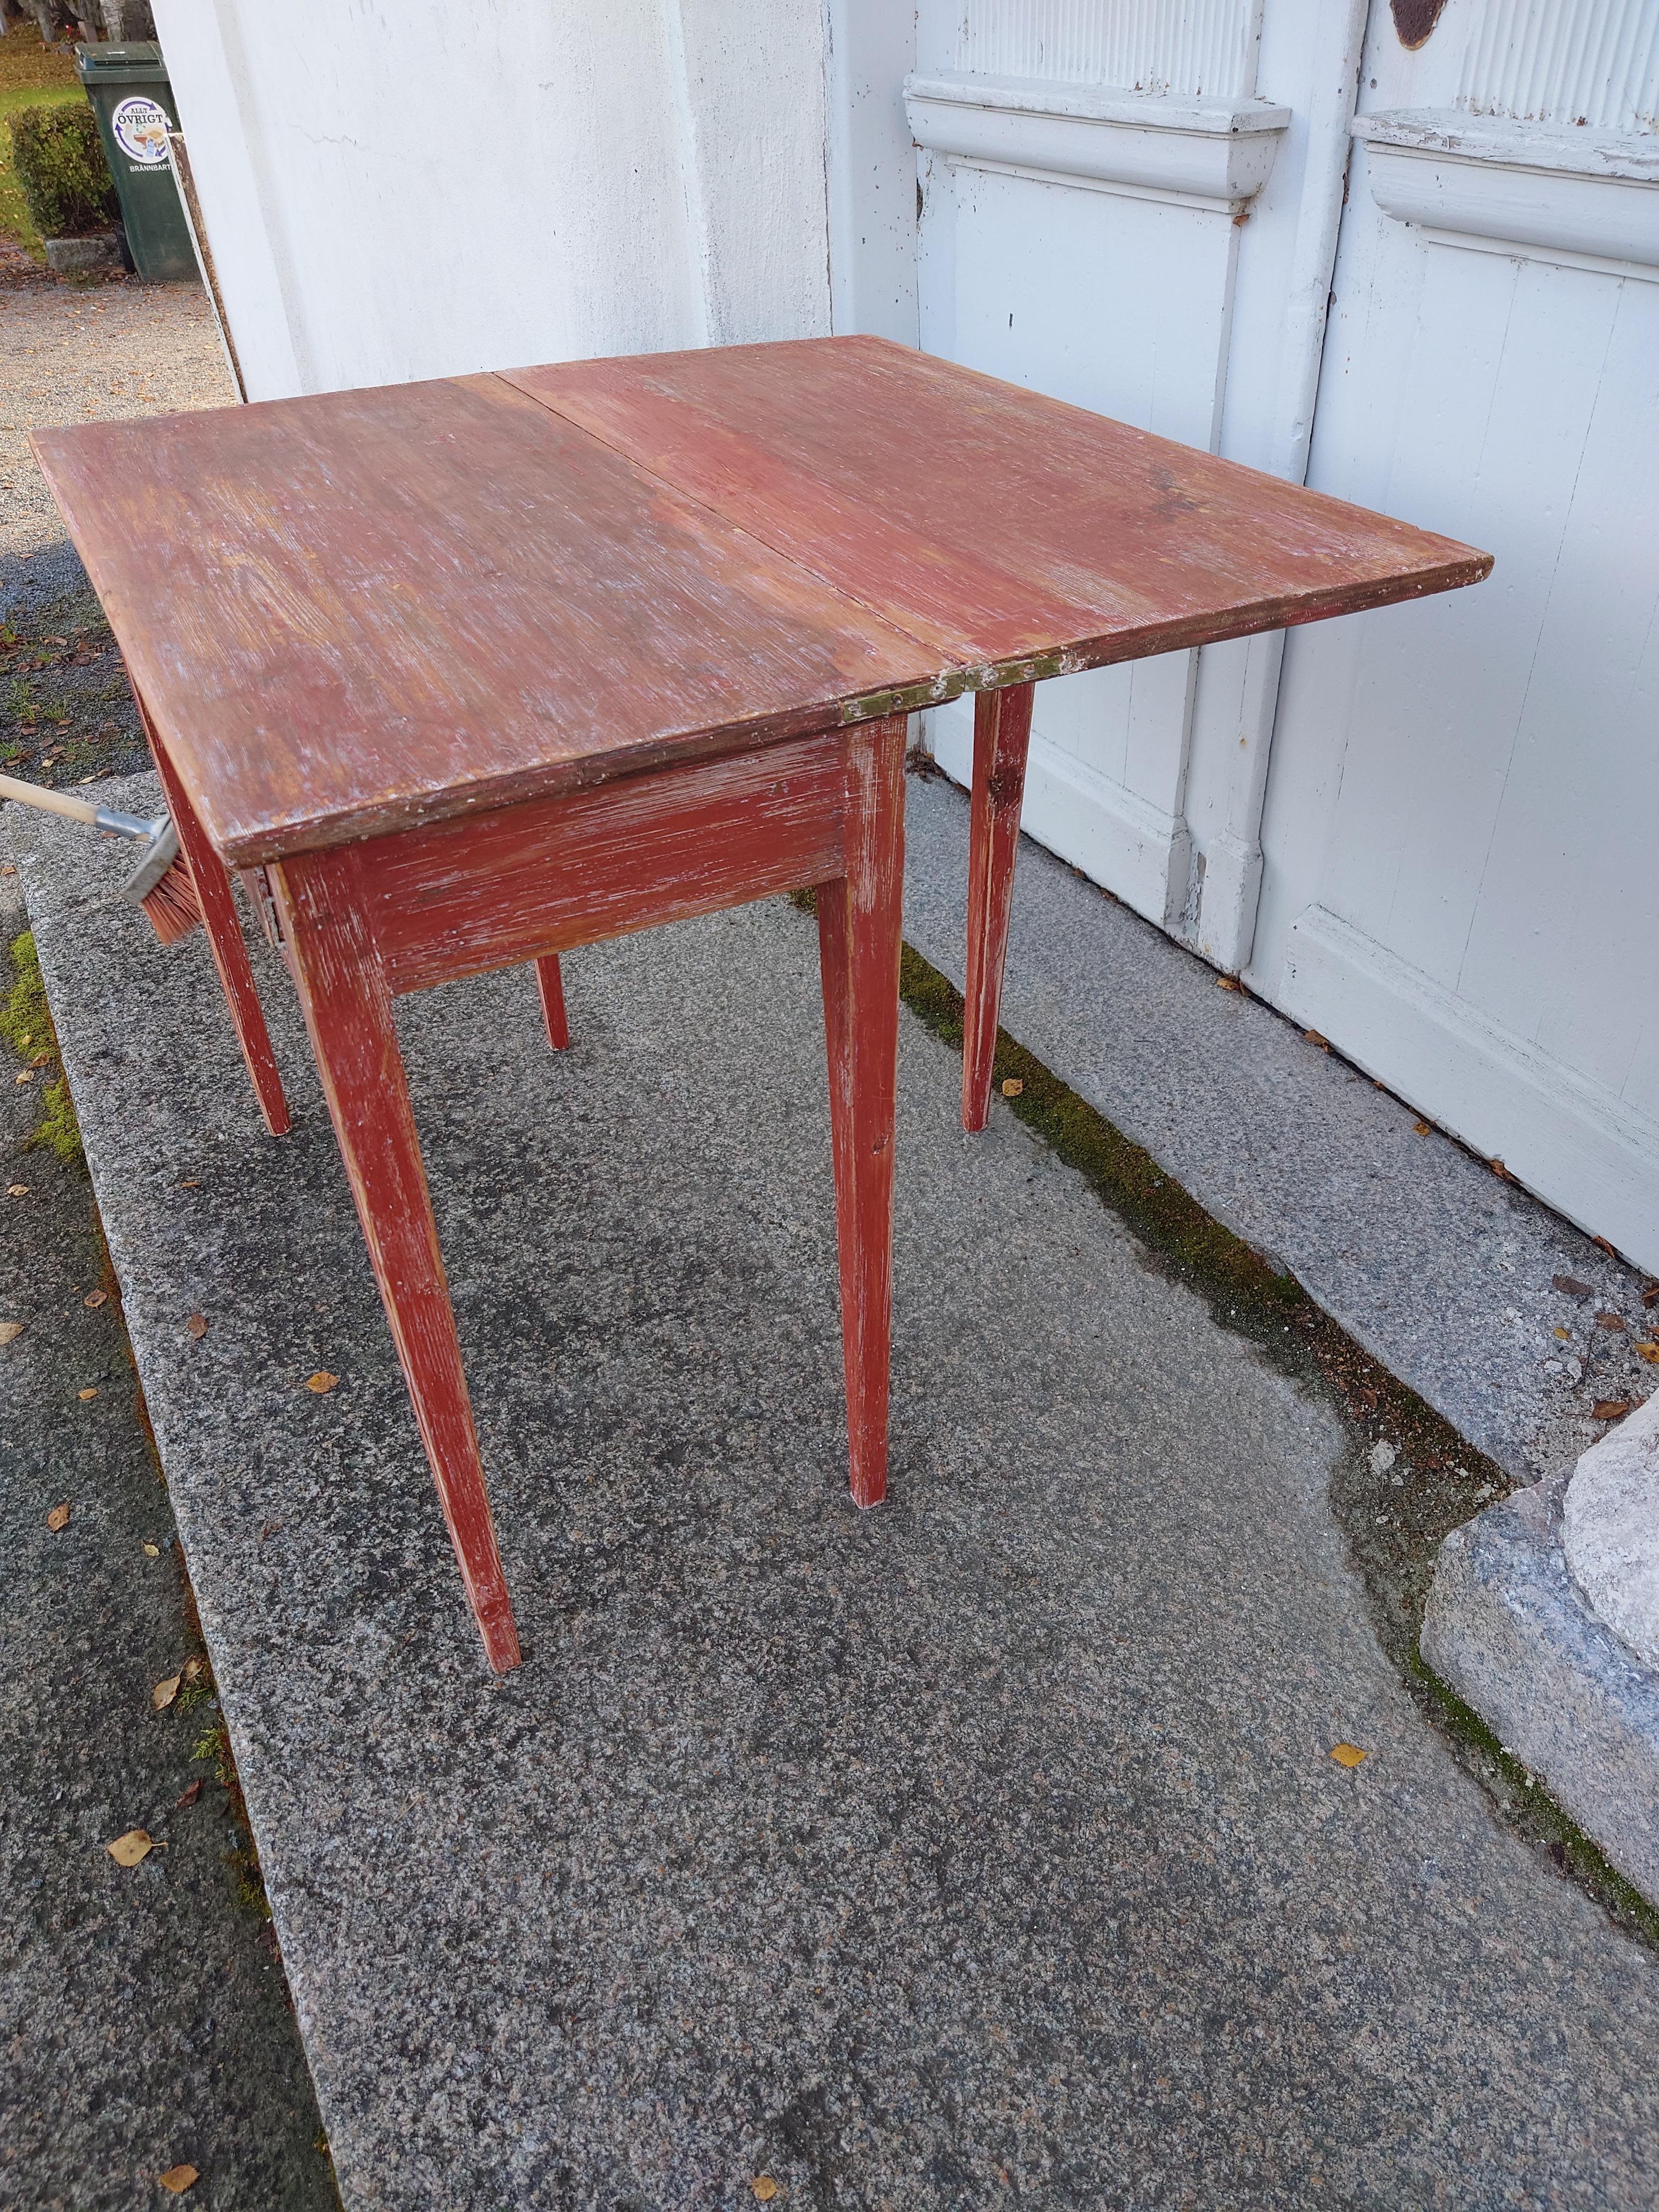  19th Century Swedish antique  rustic genuine Game Table for Playing games   For Sale 4